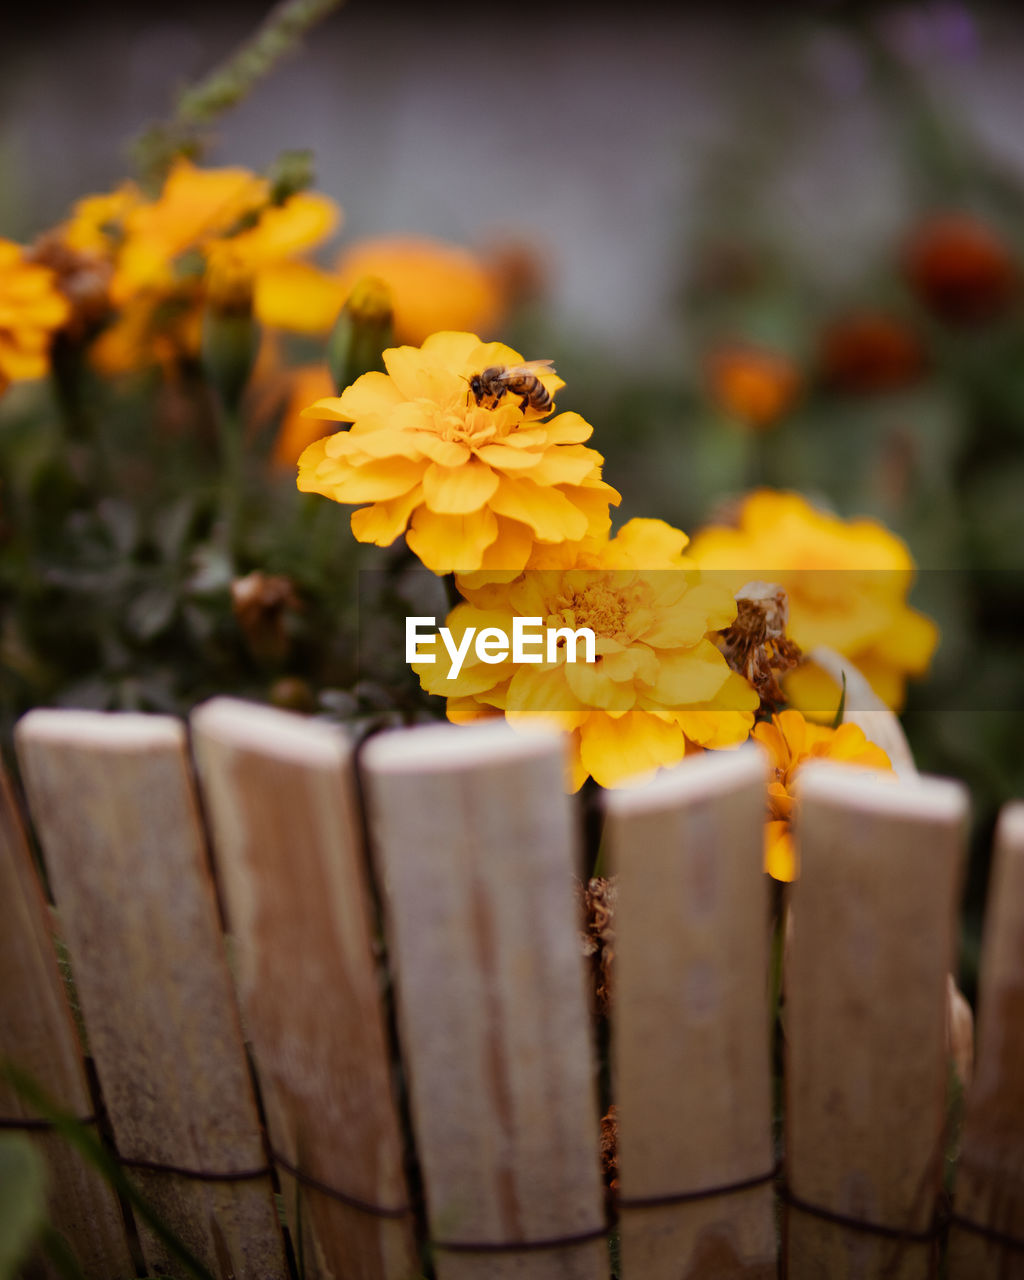 A bee standing on a yellow flower in a garden